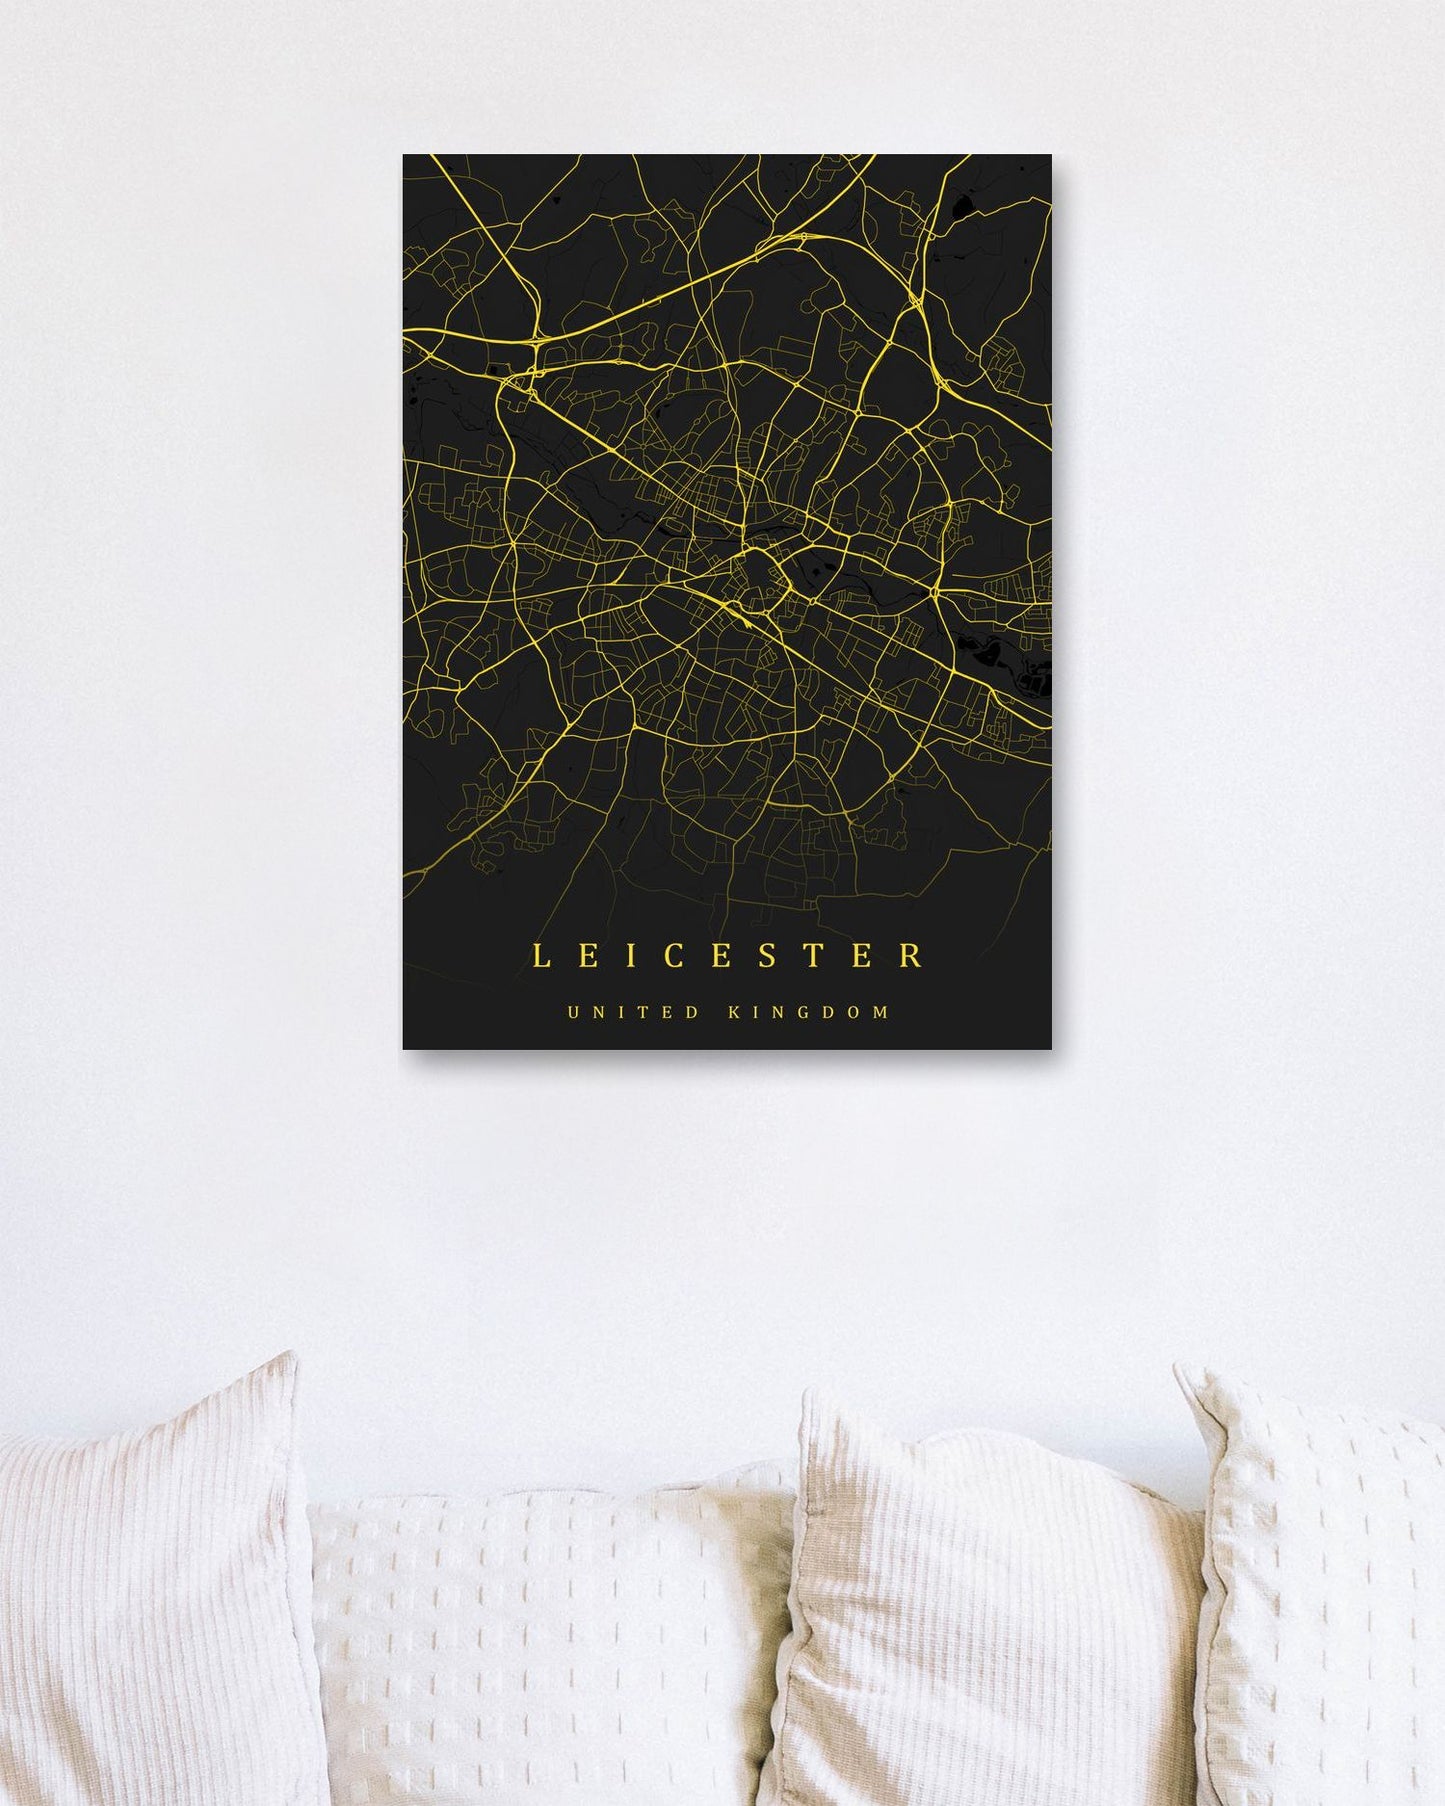 Leicester map - @SanDee15